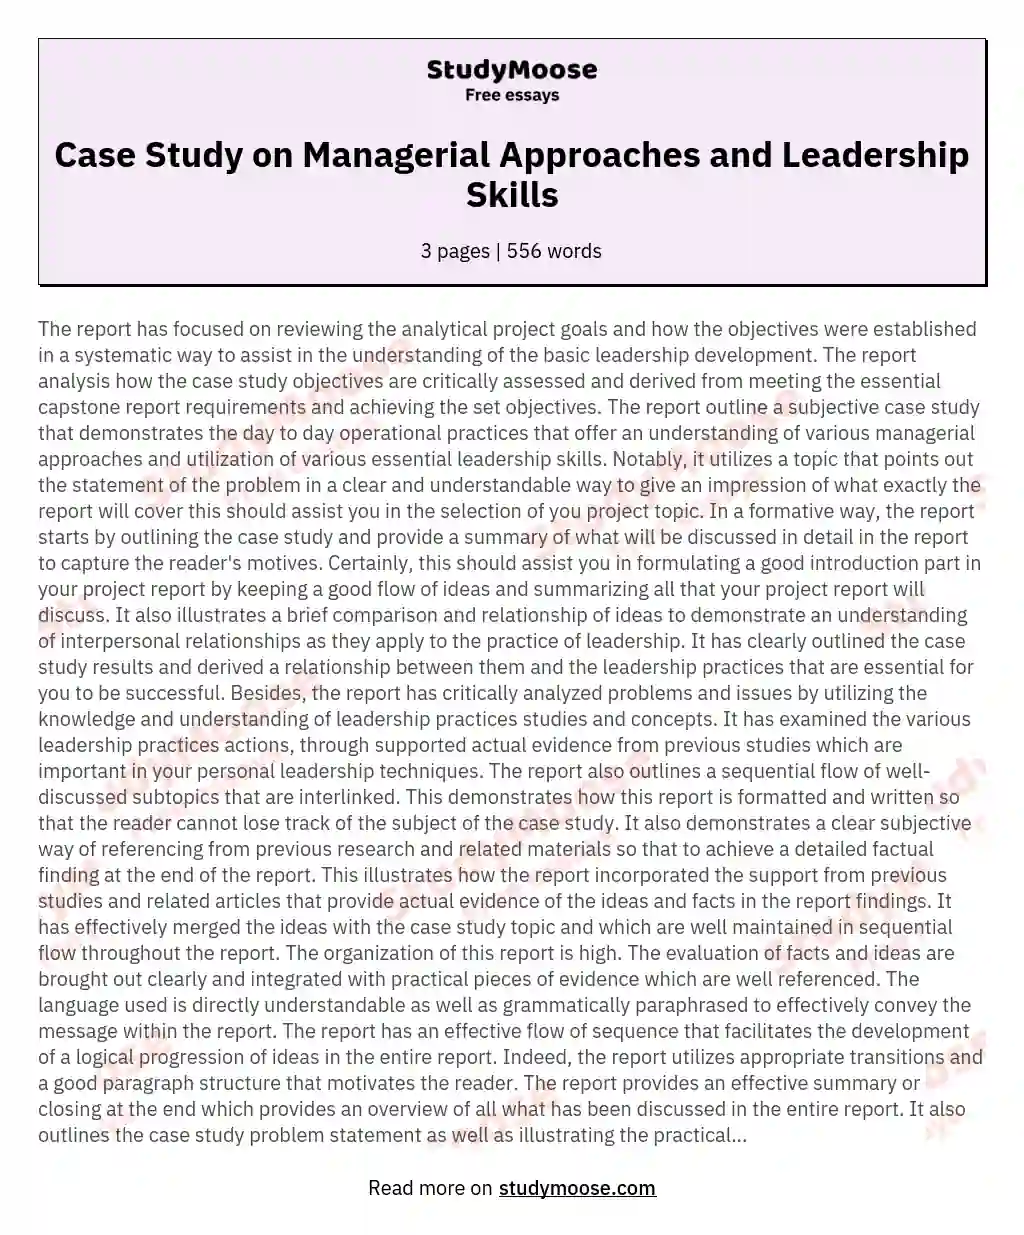 Case Study on Managerial Approaches and Leadership Skills essay